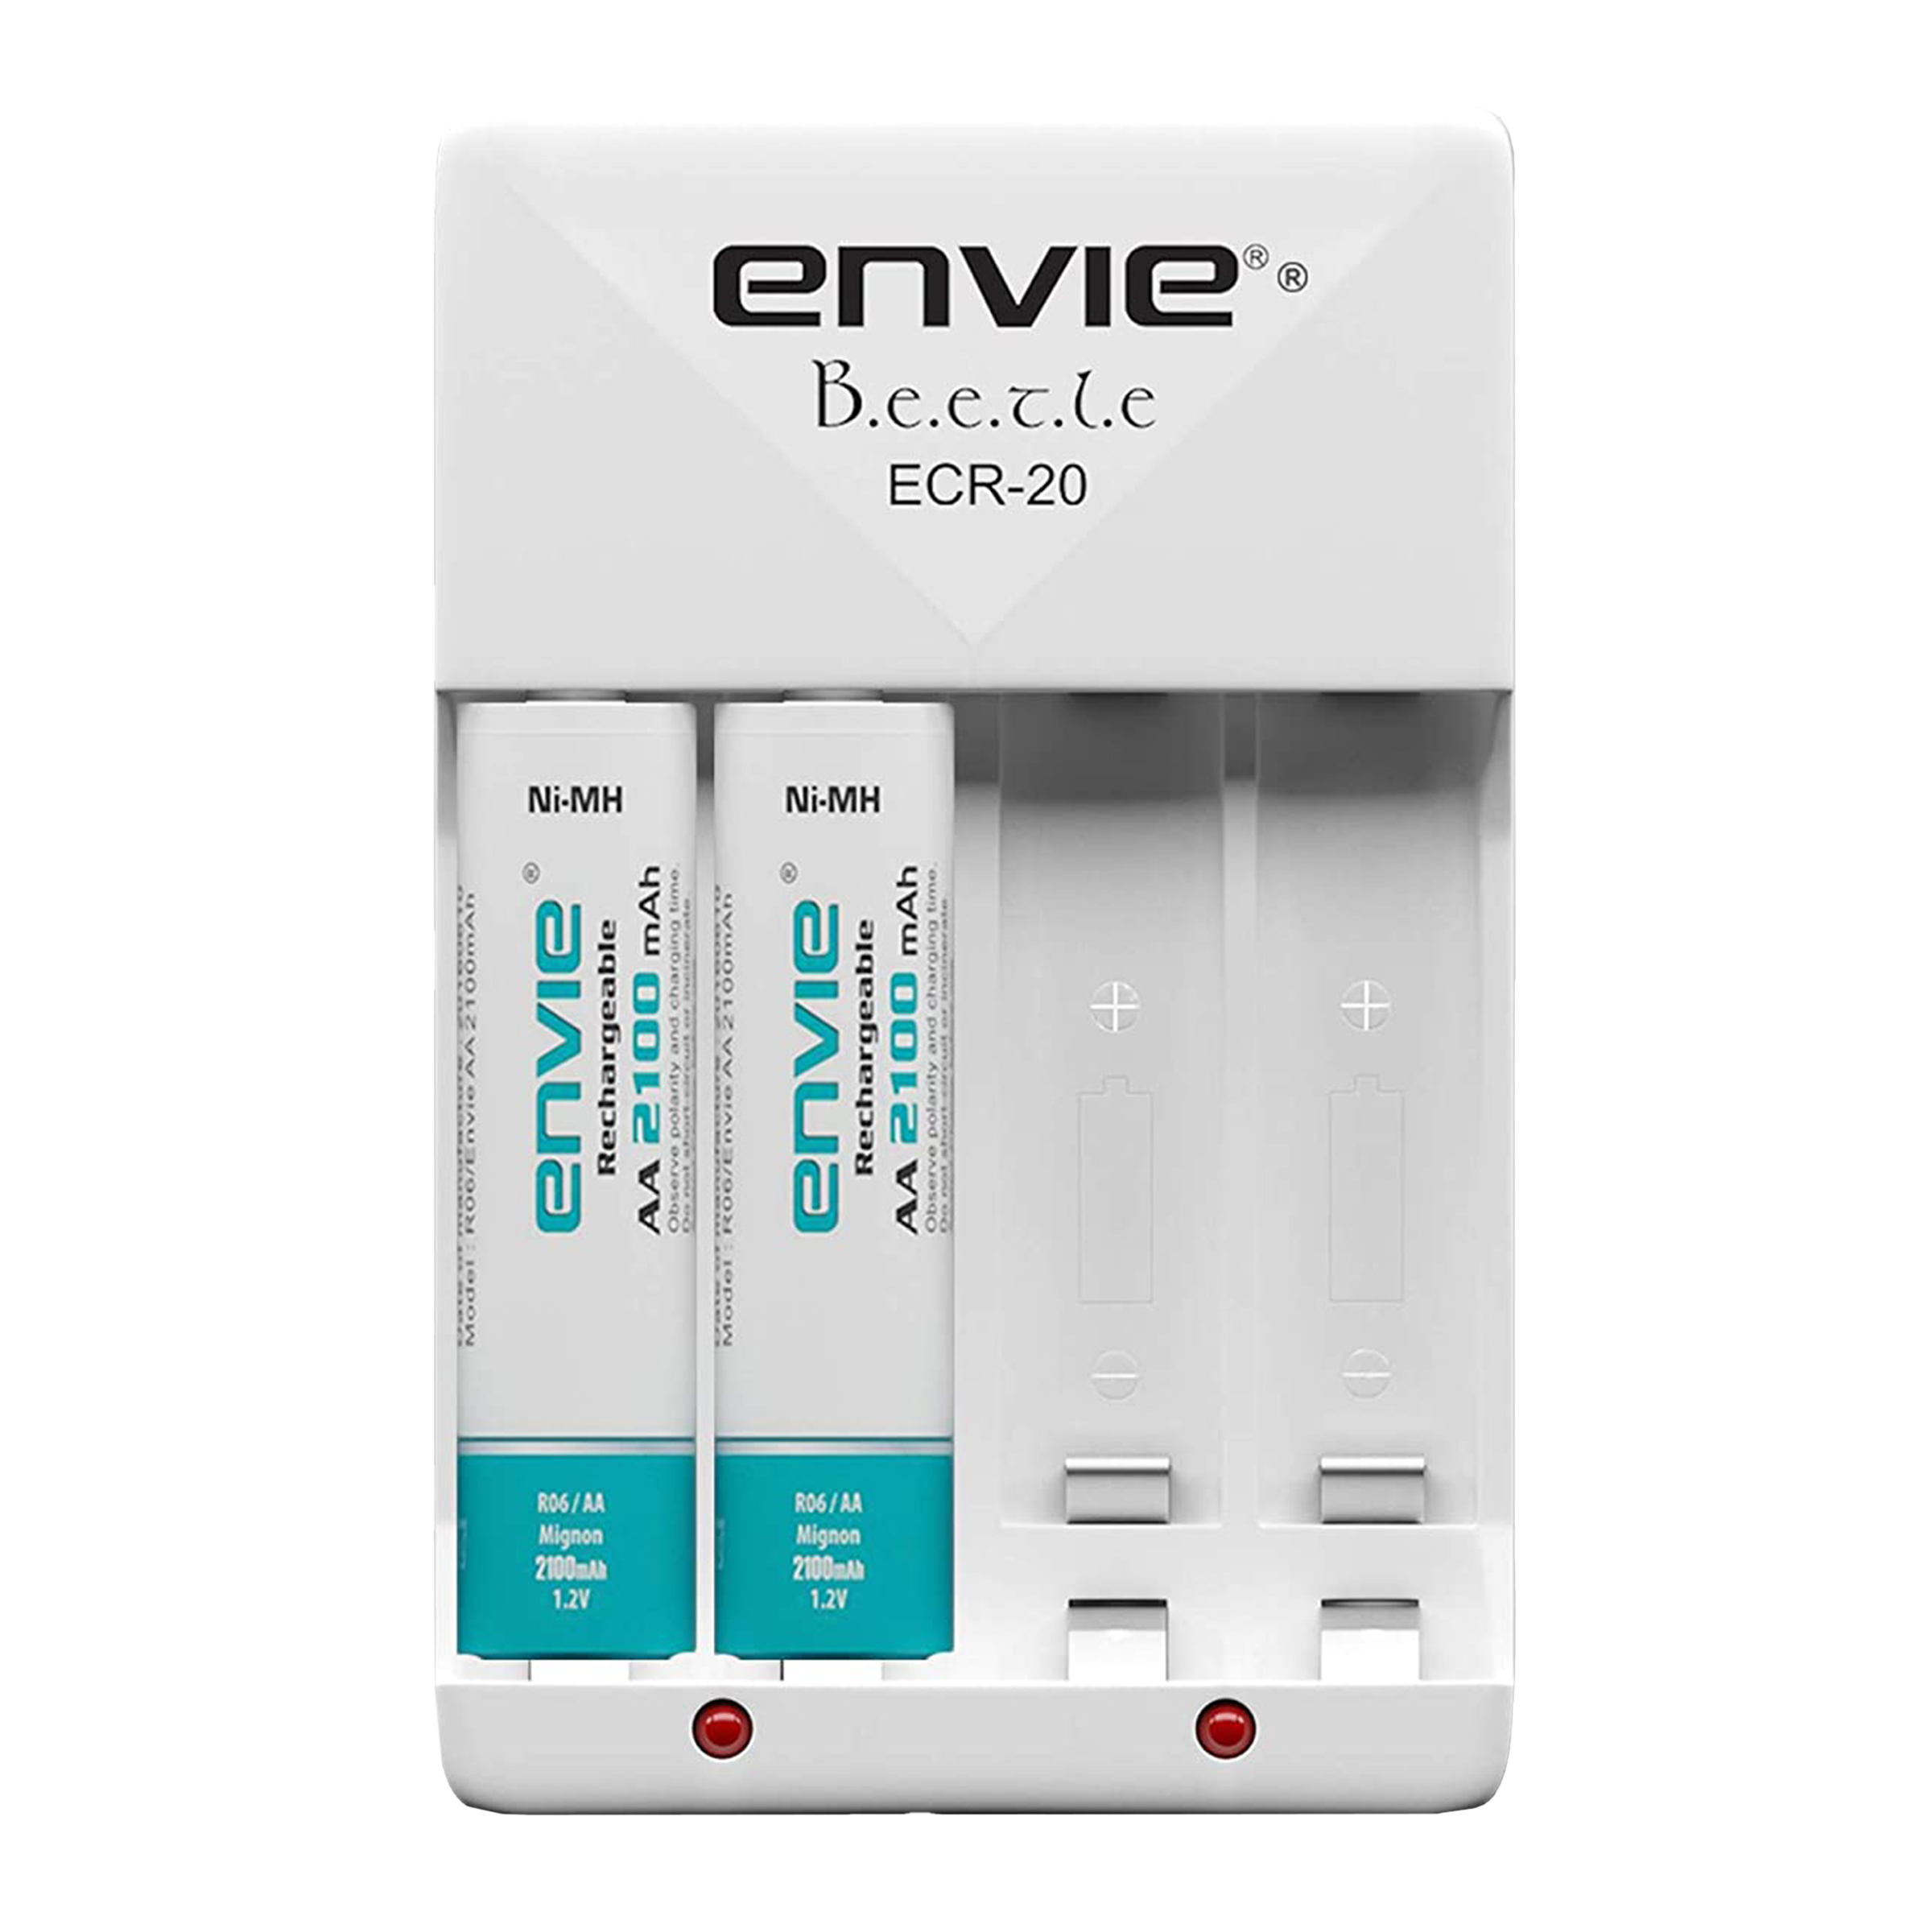 envie Beetle ECR-20 Camera Battery Charger Combo for AA21002PL (4-Ports, Short Circuit Protection)